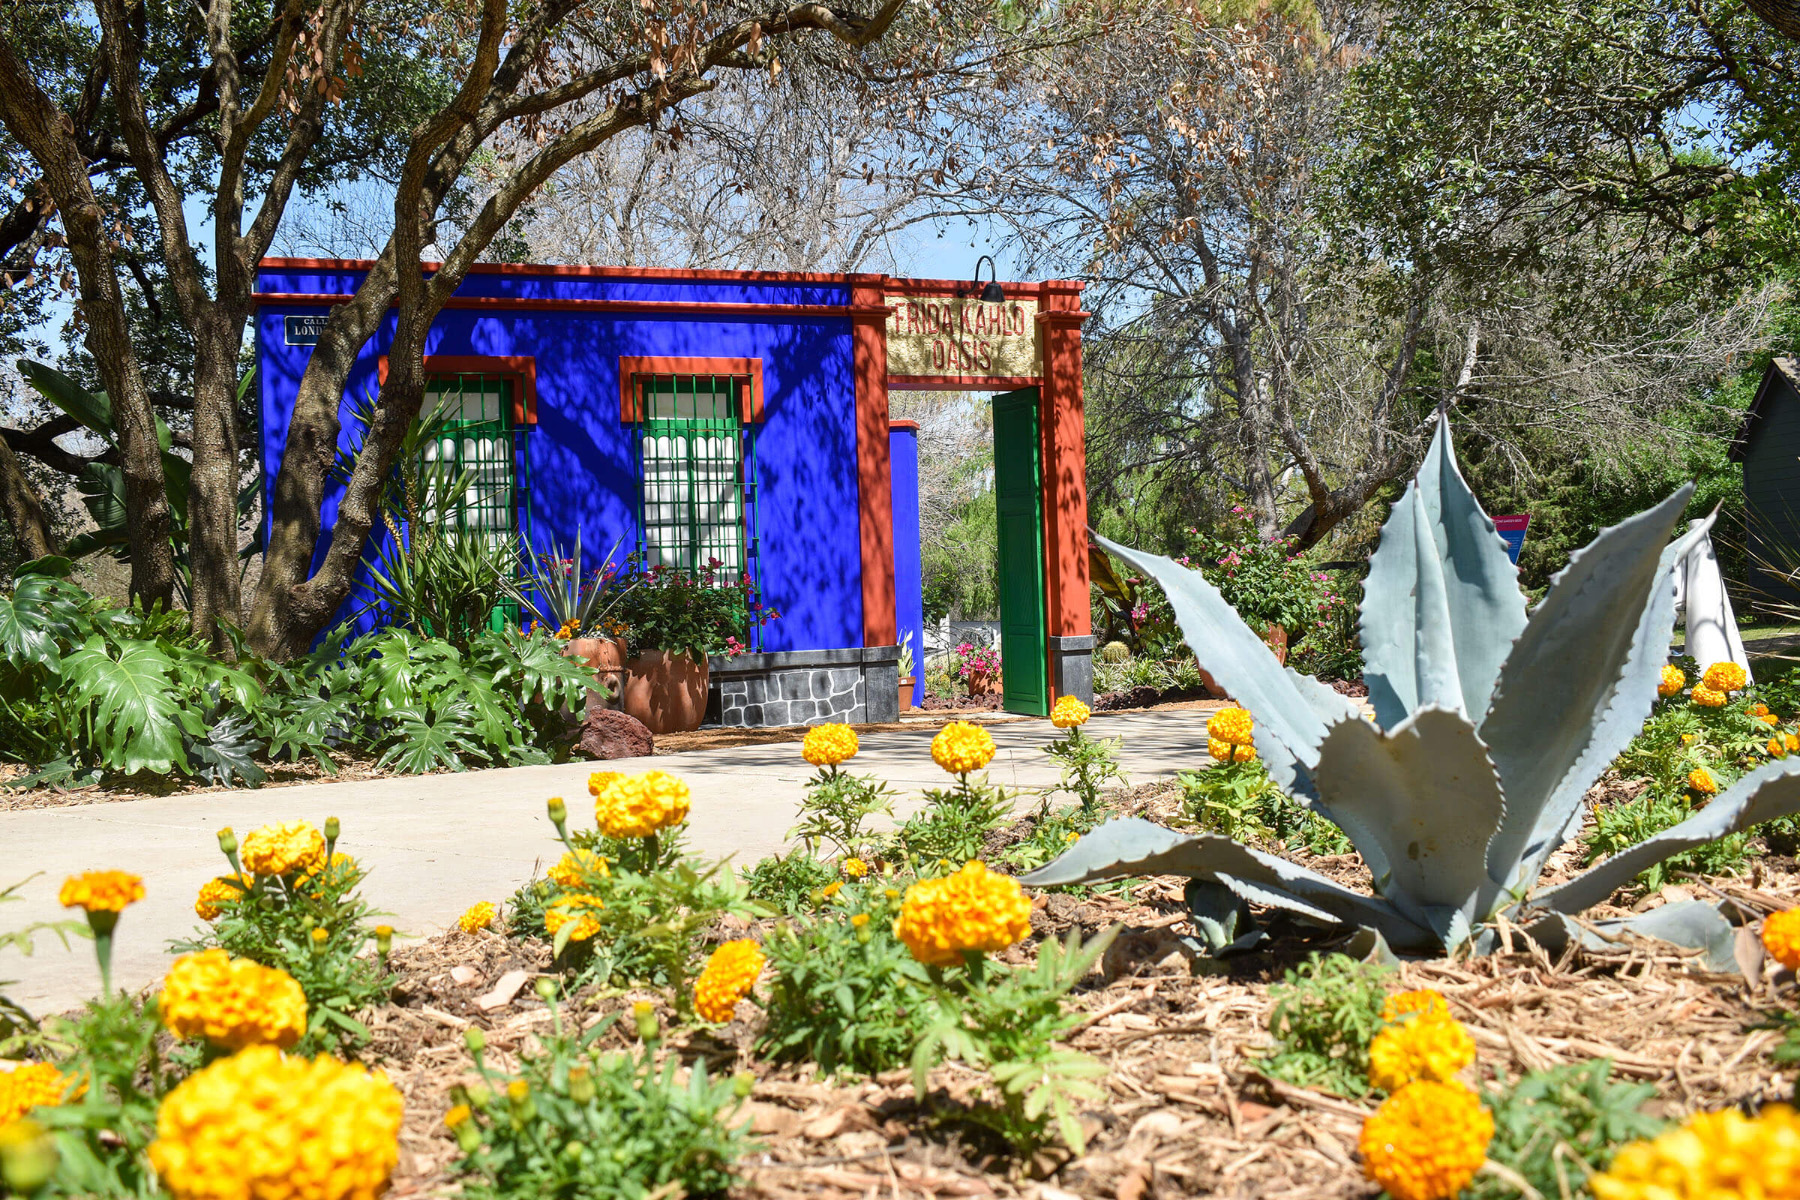 One of the recreated facades of the artist's Mexico City home, La Casa Azul, sits in a flower bed featuring blooming yellow plants and a huge agave. Photo courtesy of San Antonio Botanical Garden.